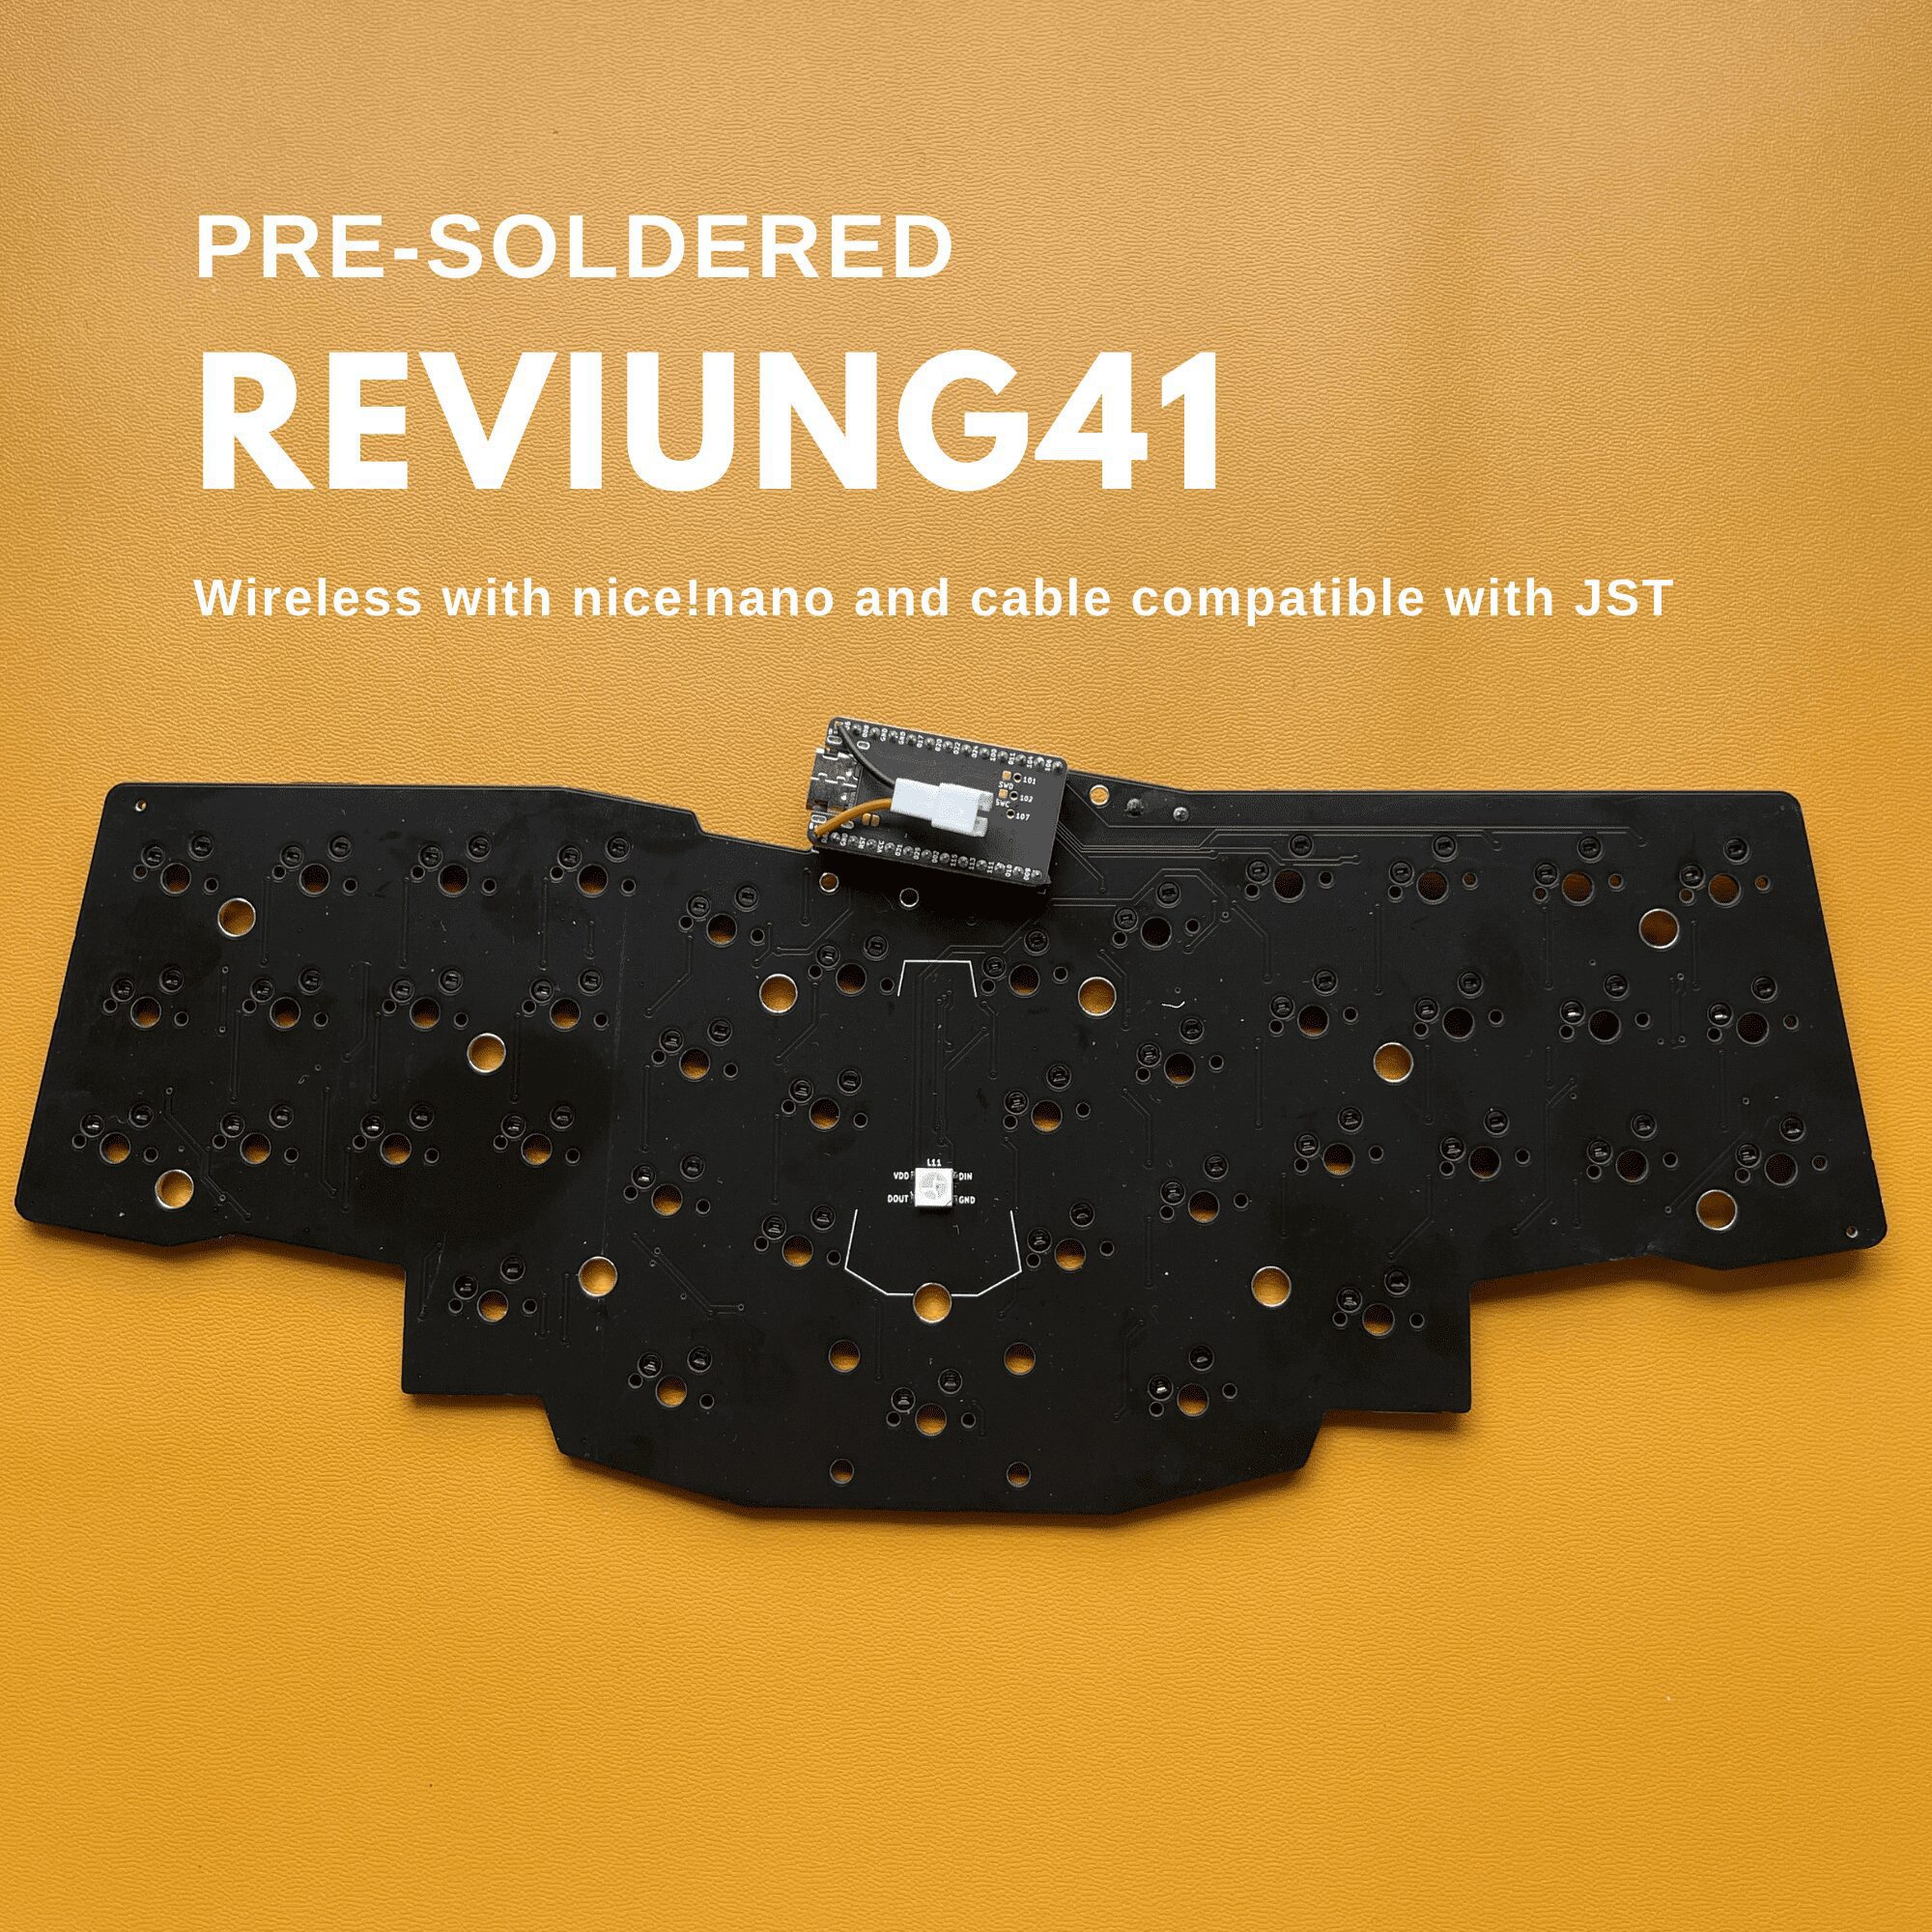 Pre-soldered REVIUNG41 (wireless option available)